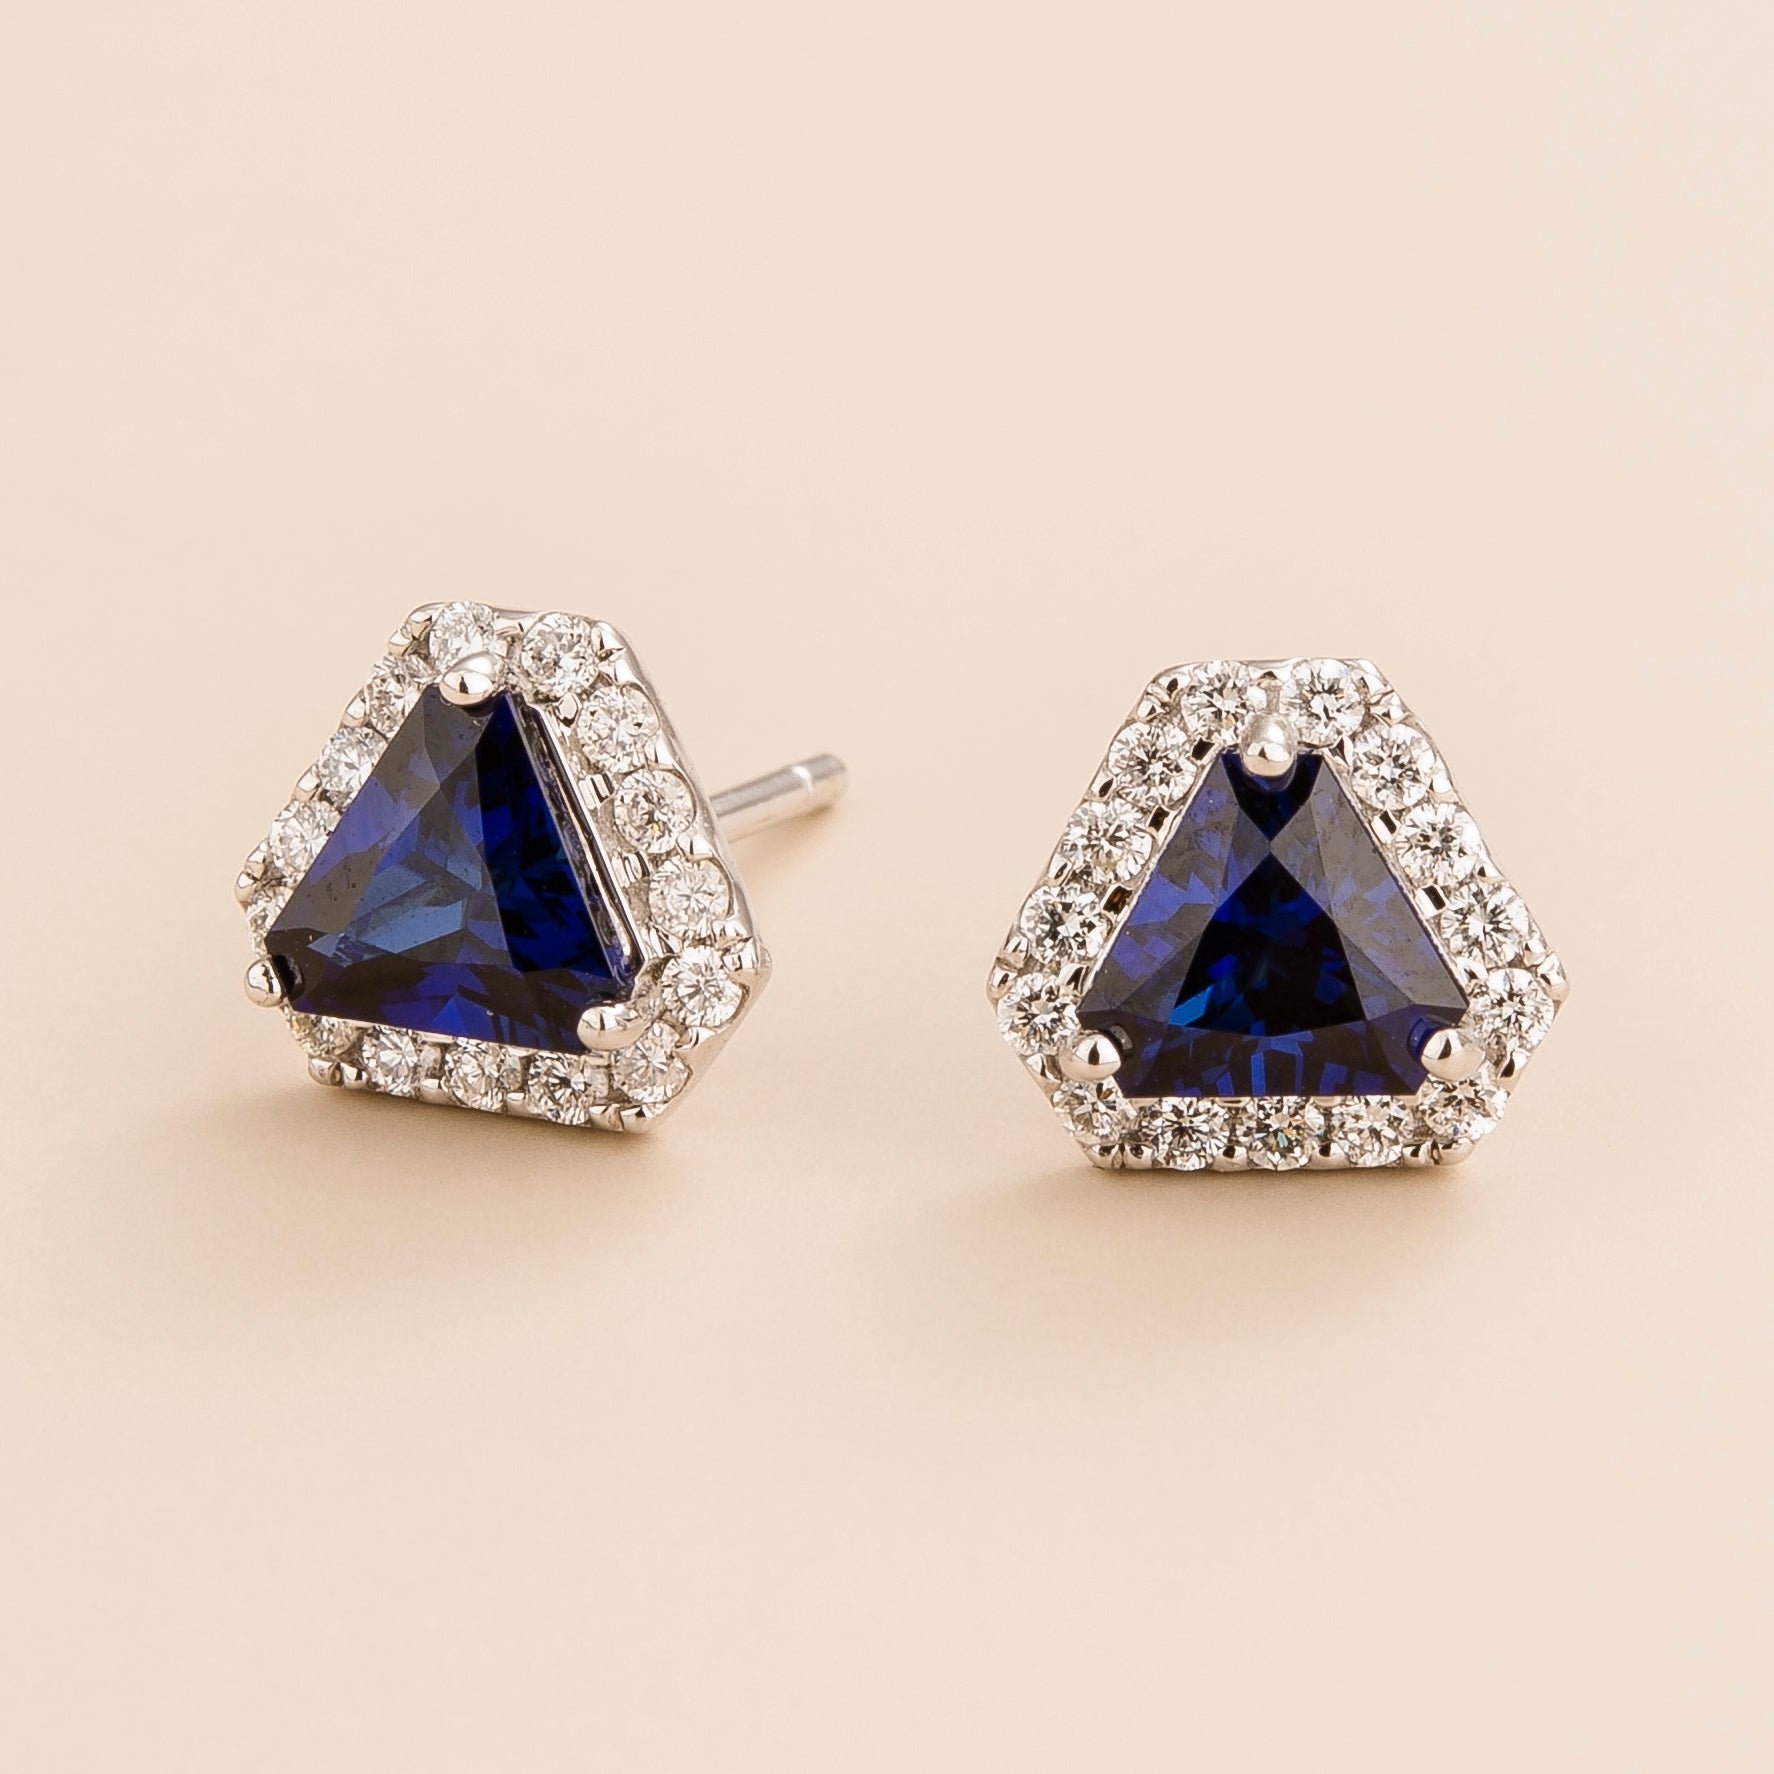 Royal, Stunning and Hypnotic Sapphire